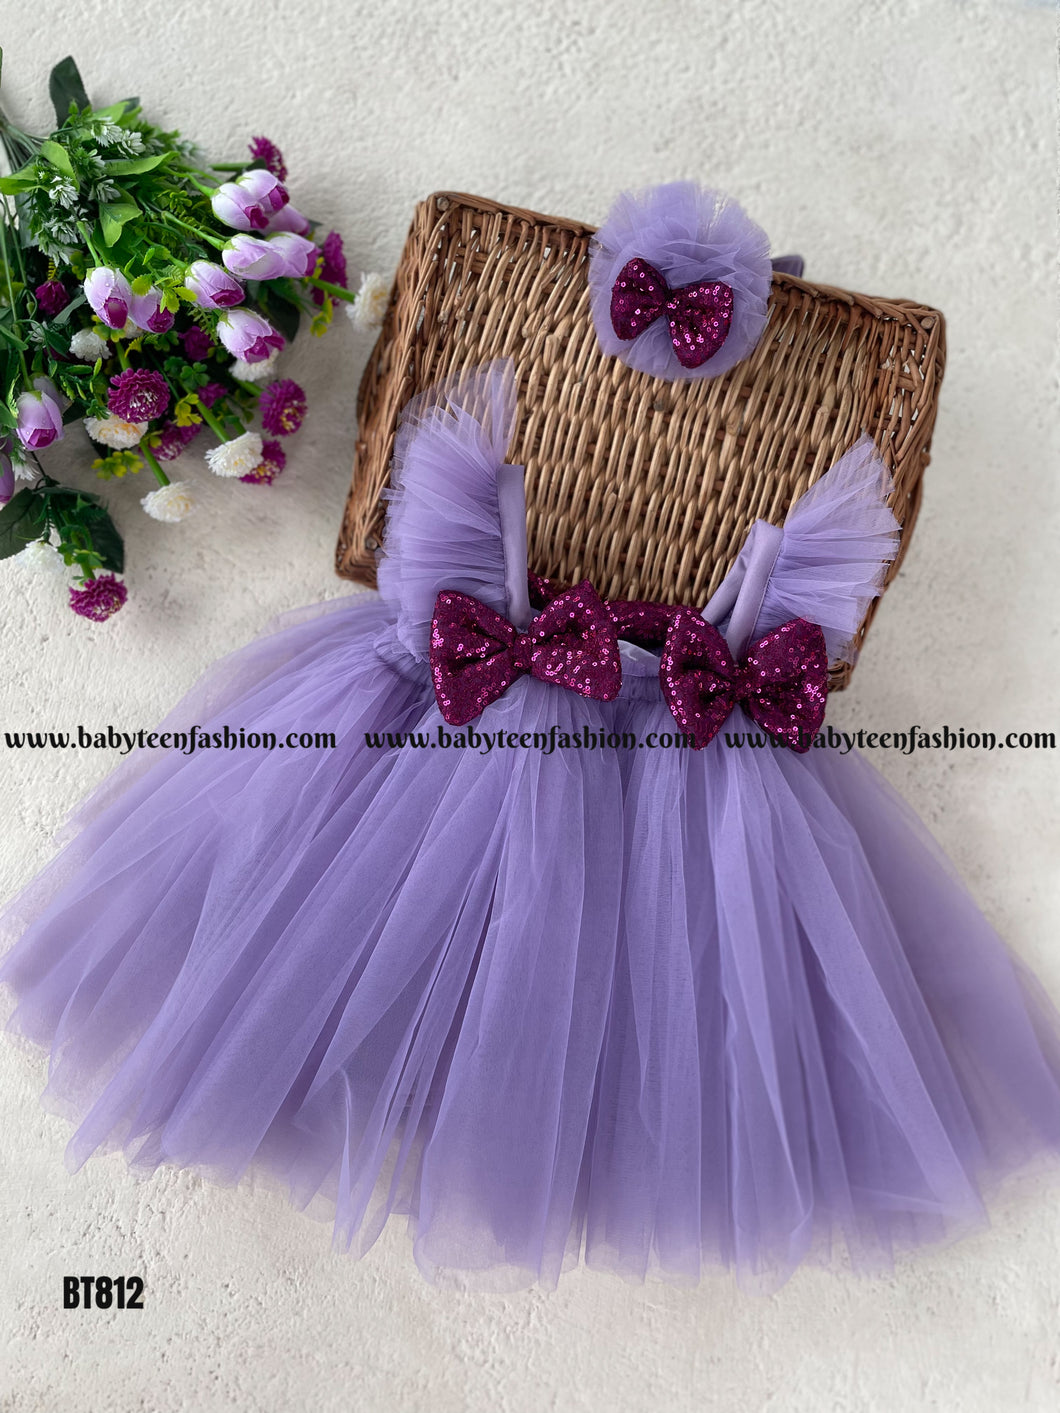 BT812 Sequins Bow Frock